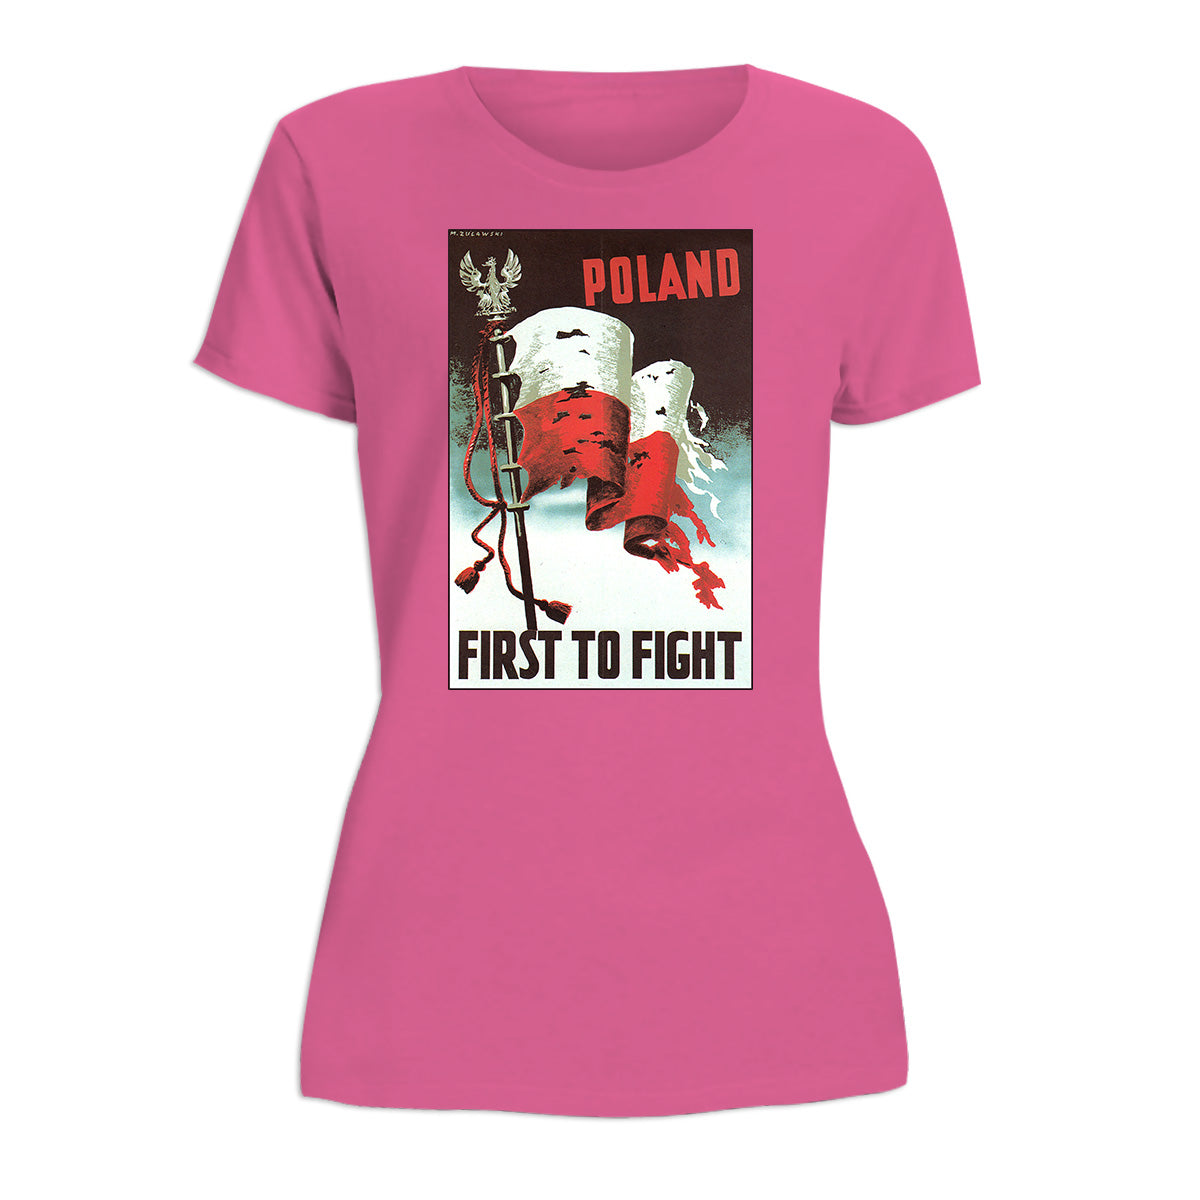 Vintage Poster 1939 Poland First To Fight Women's Short Sleeve Tshirt